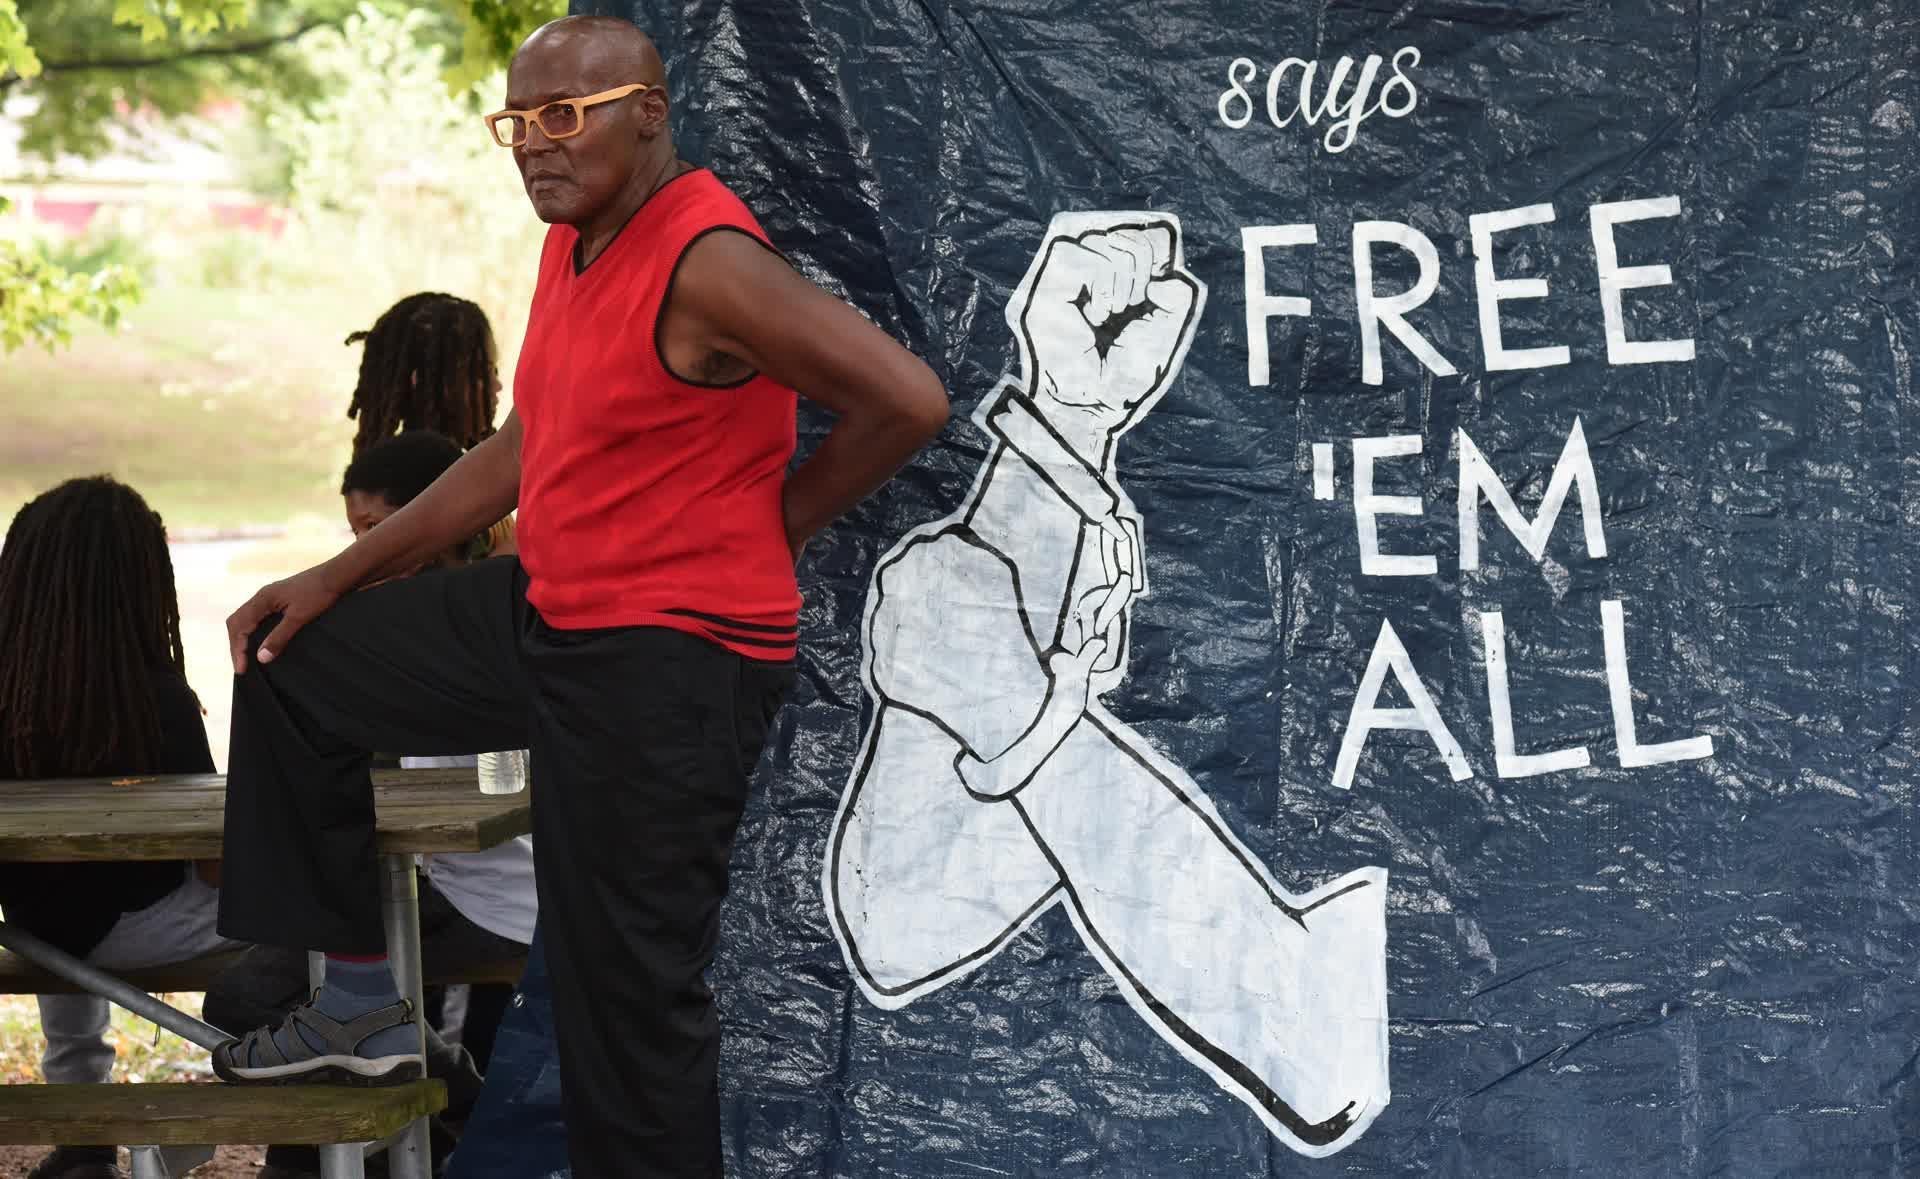 Ojore Lutalo standing next to picnic table and large banner that says free em all.